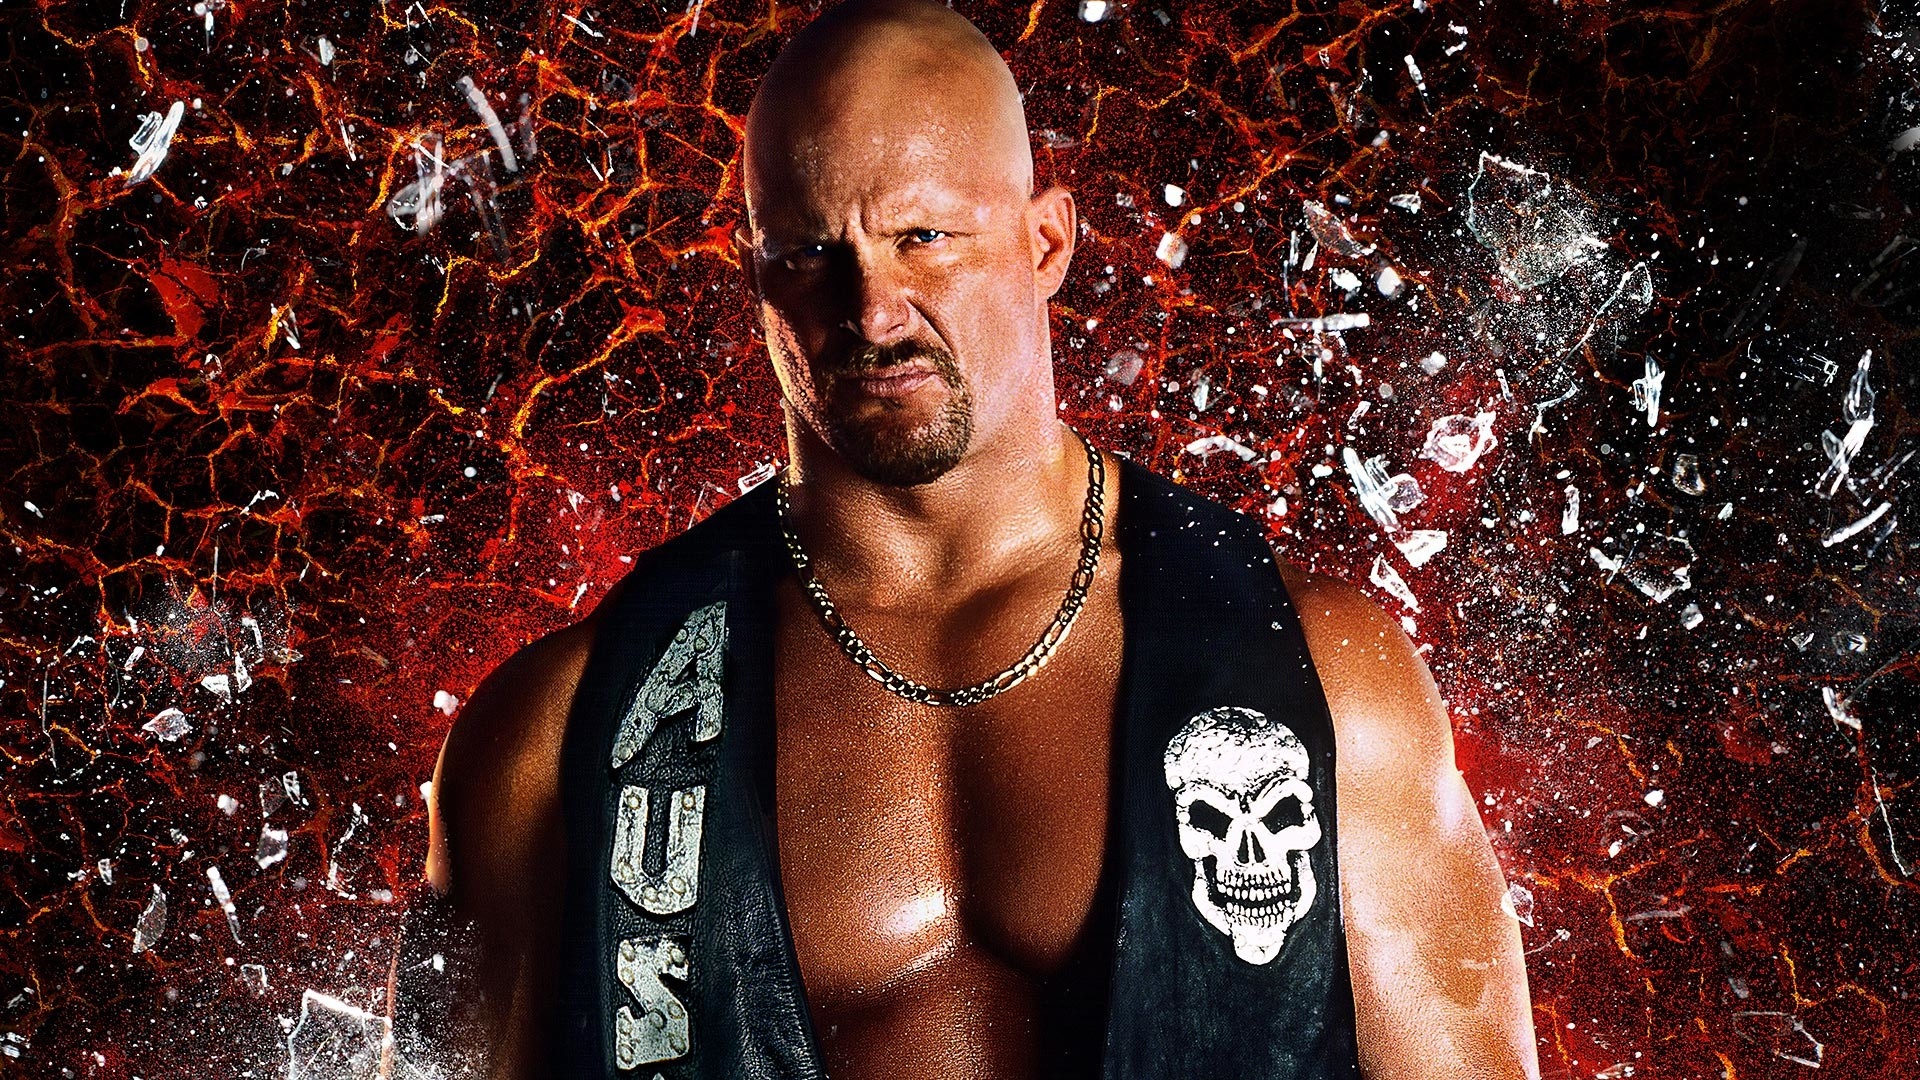 Stone Cold wallpapers, Background pictures, 1920x1080 Full HD Desktop